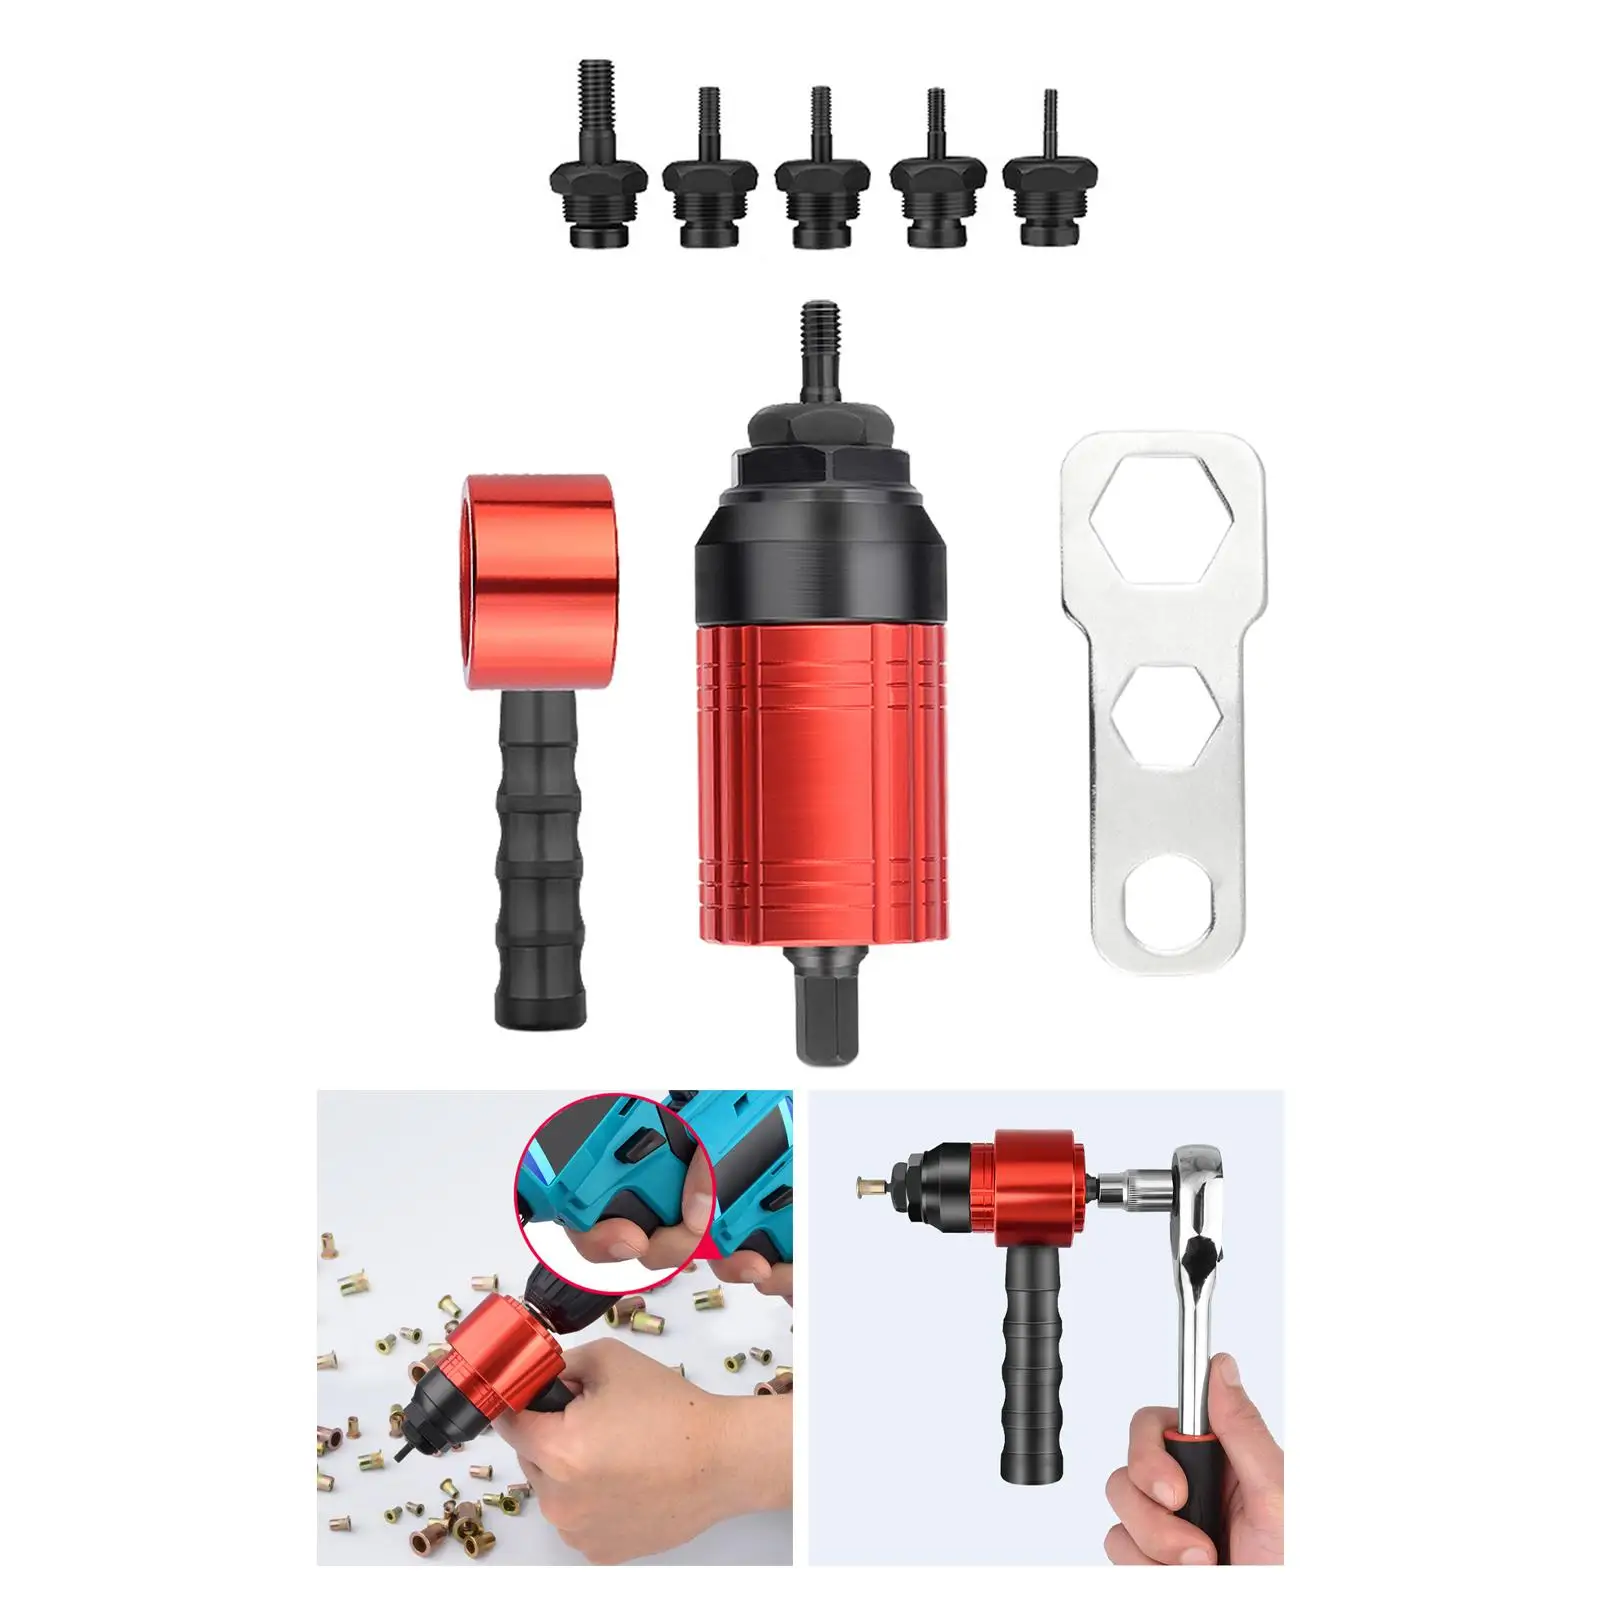 Professional Electric Rivet Nut Adapter Non-Slip Handle for Furniture